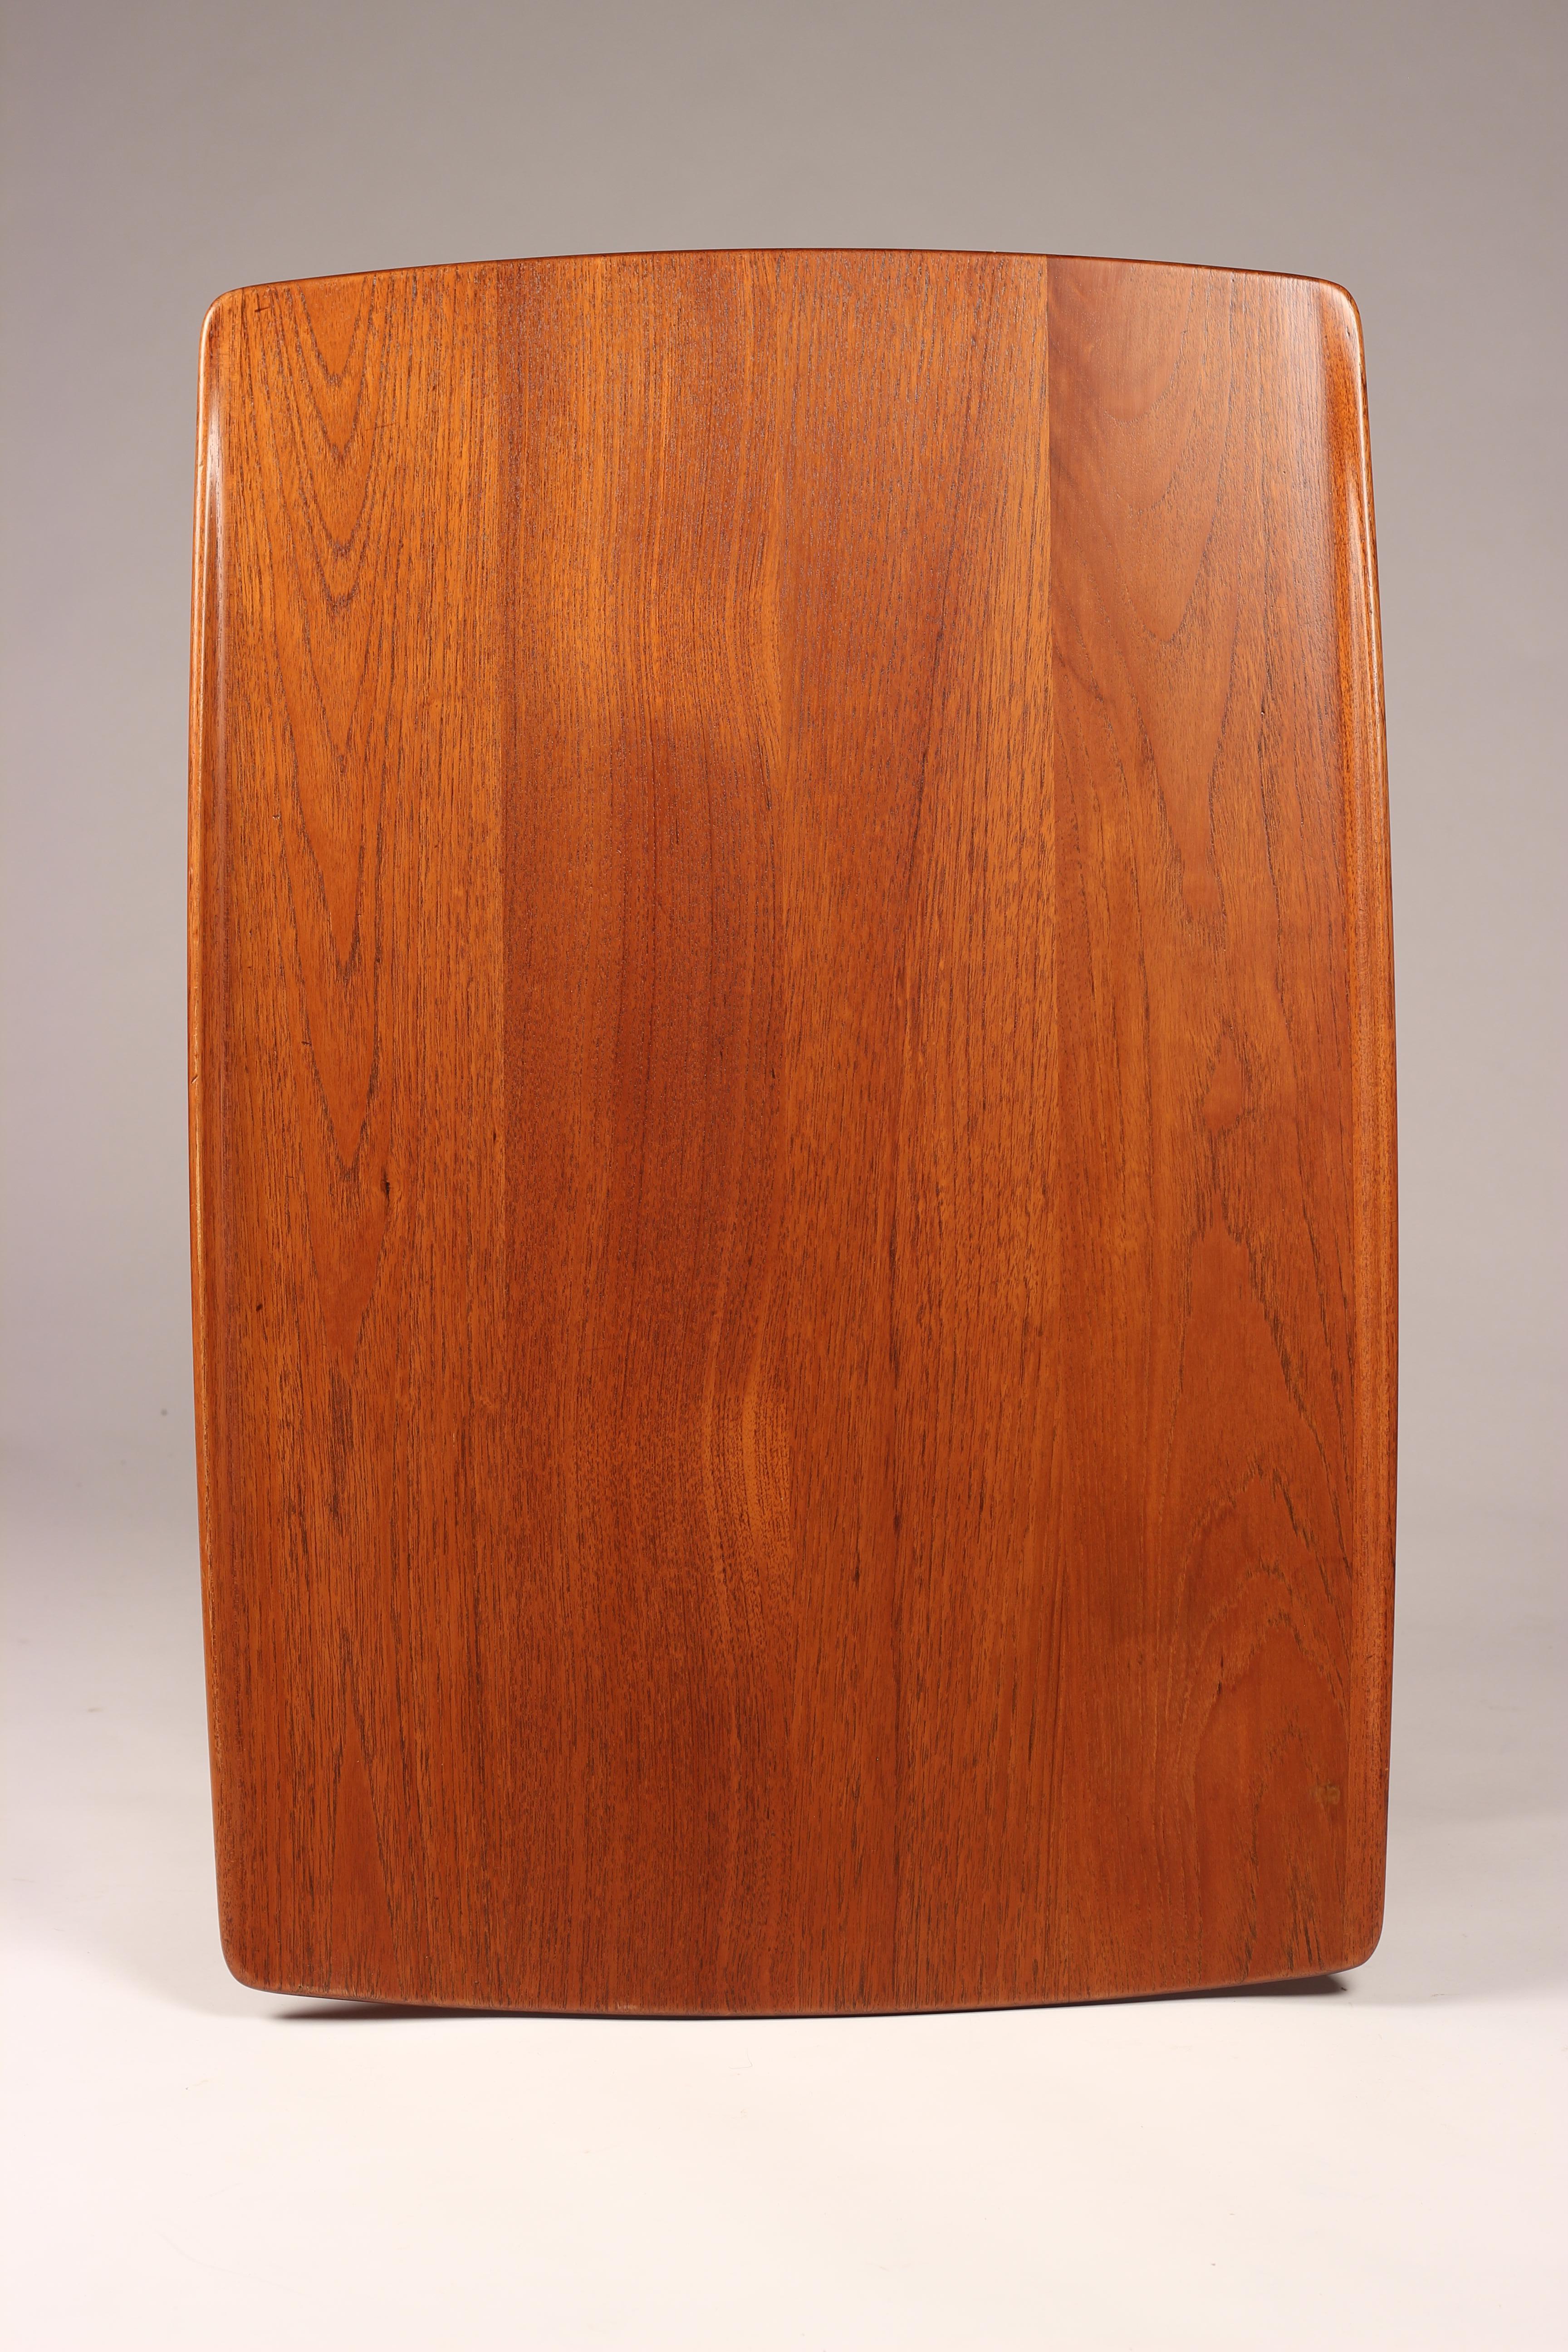 Scandinavian Modern Teak Side Table by Tove and Edvard Kindt-Larsen In Good Condition For Sale In London, GB